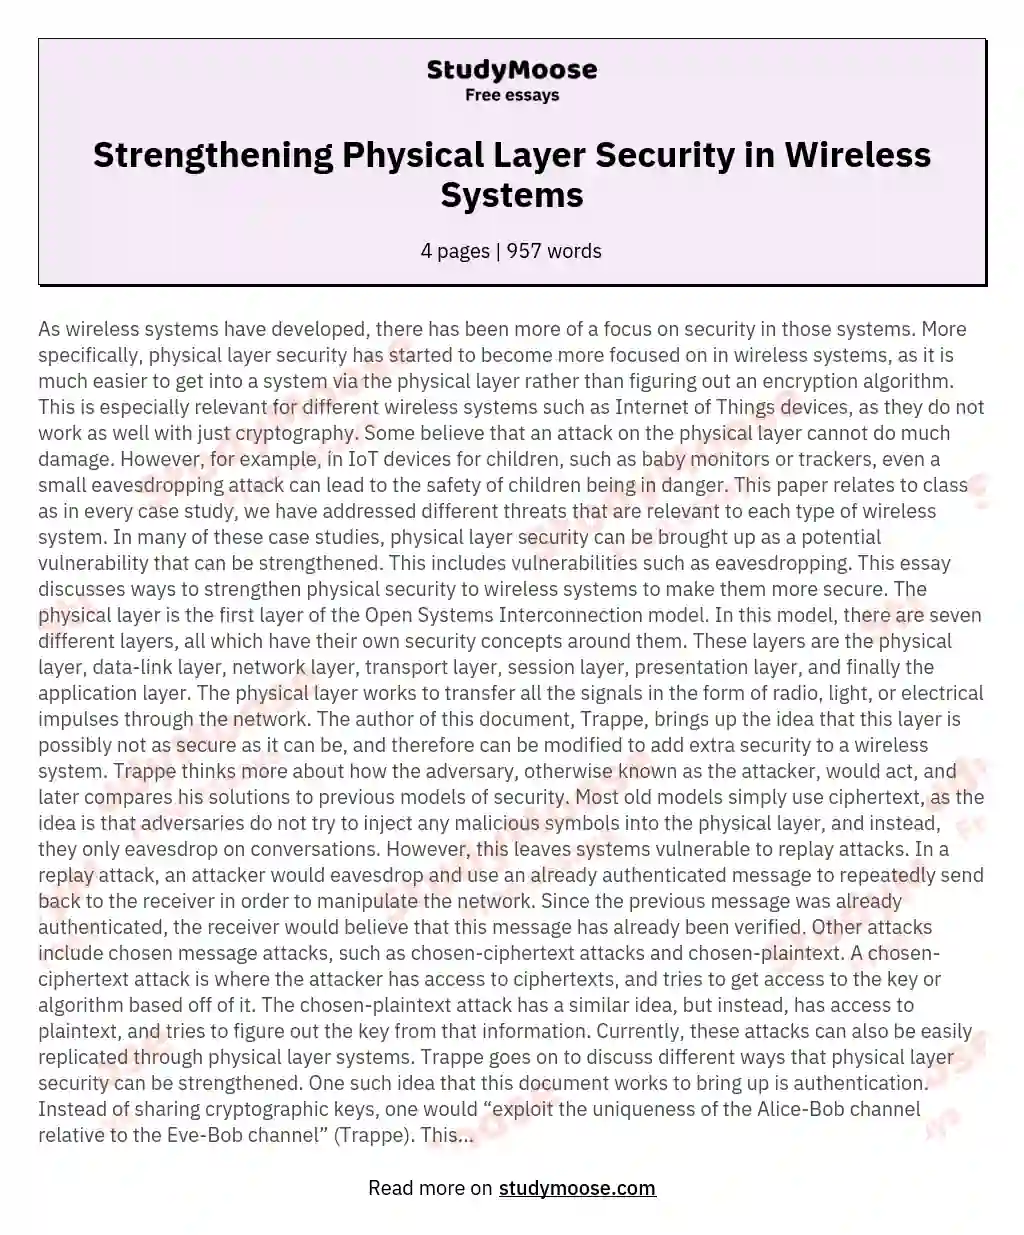 Strengthening Physical Layer Security in Wireless Systems essay